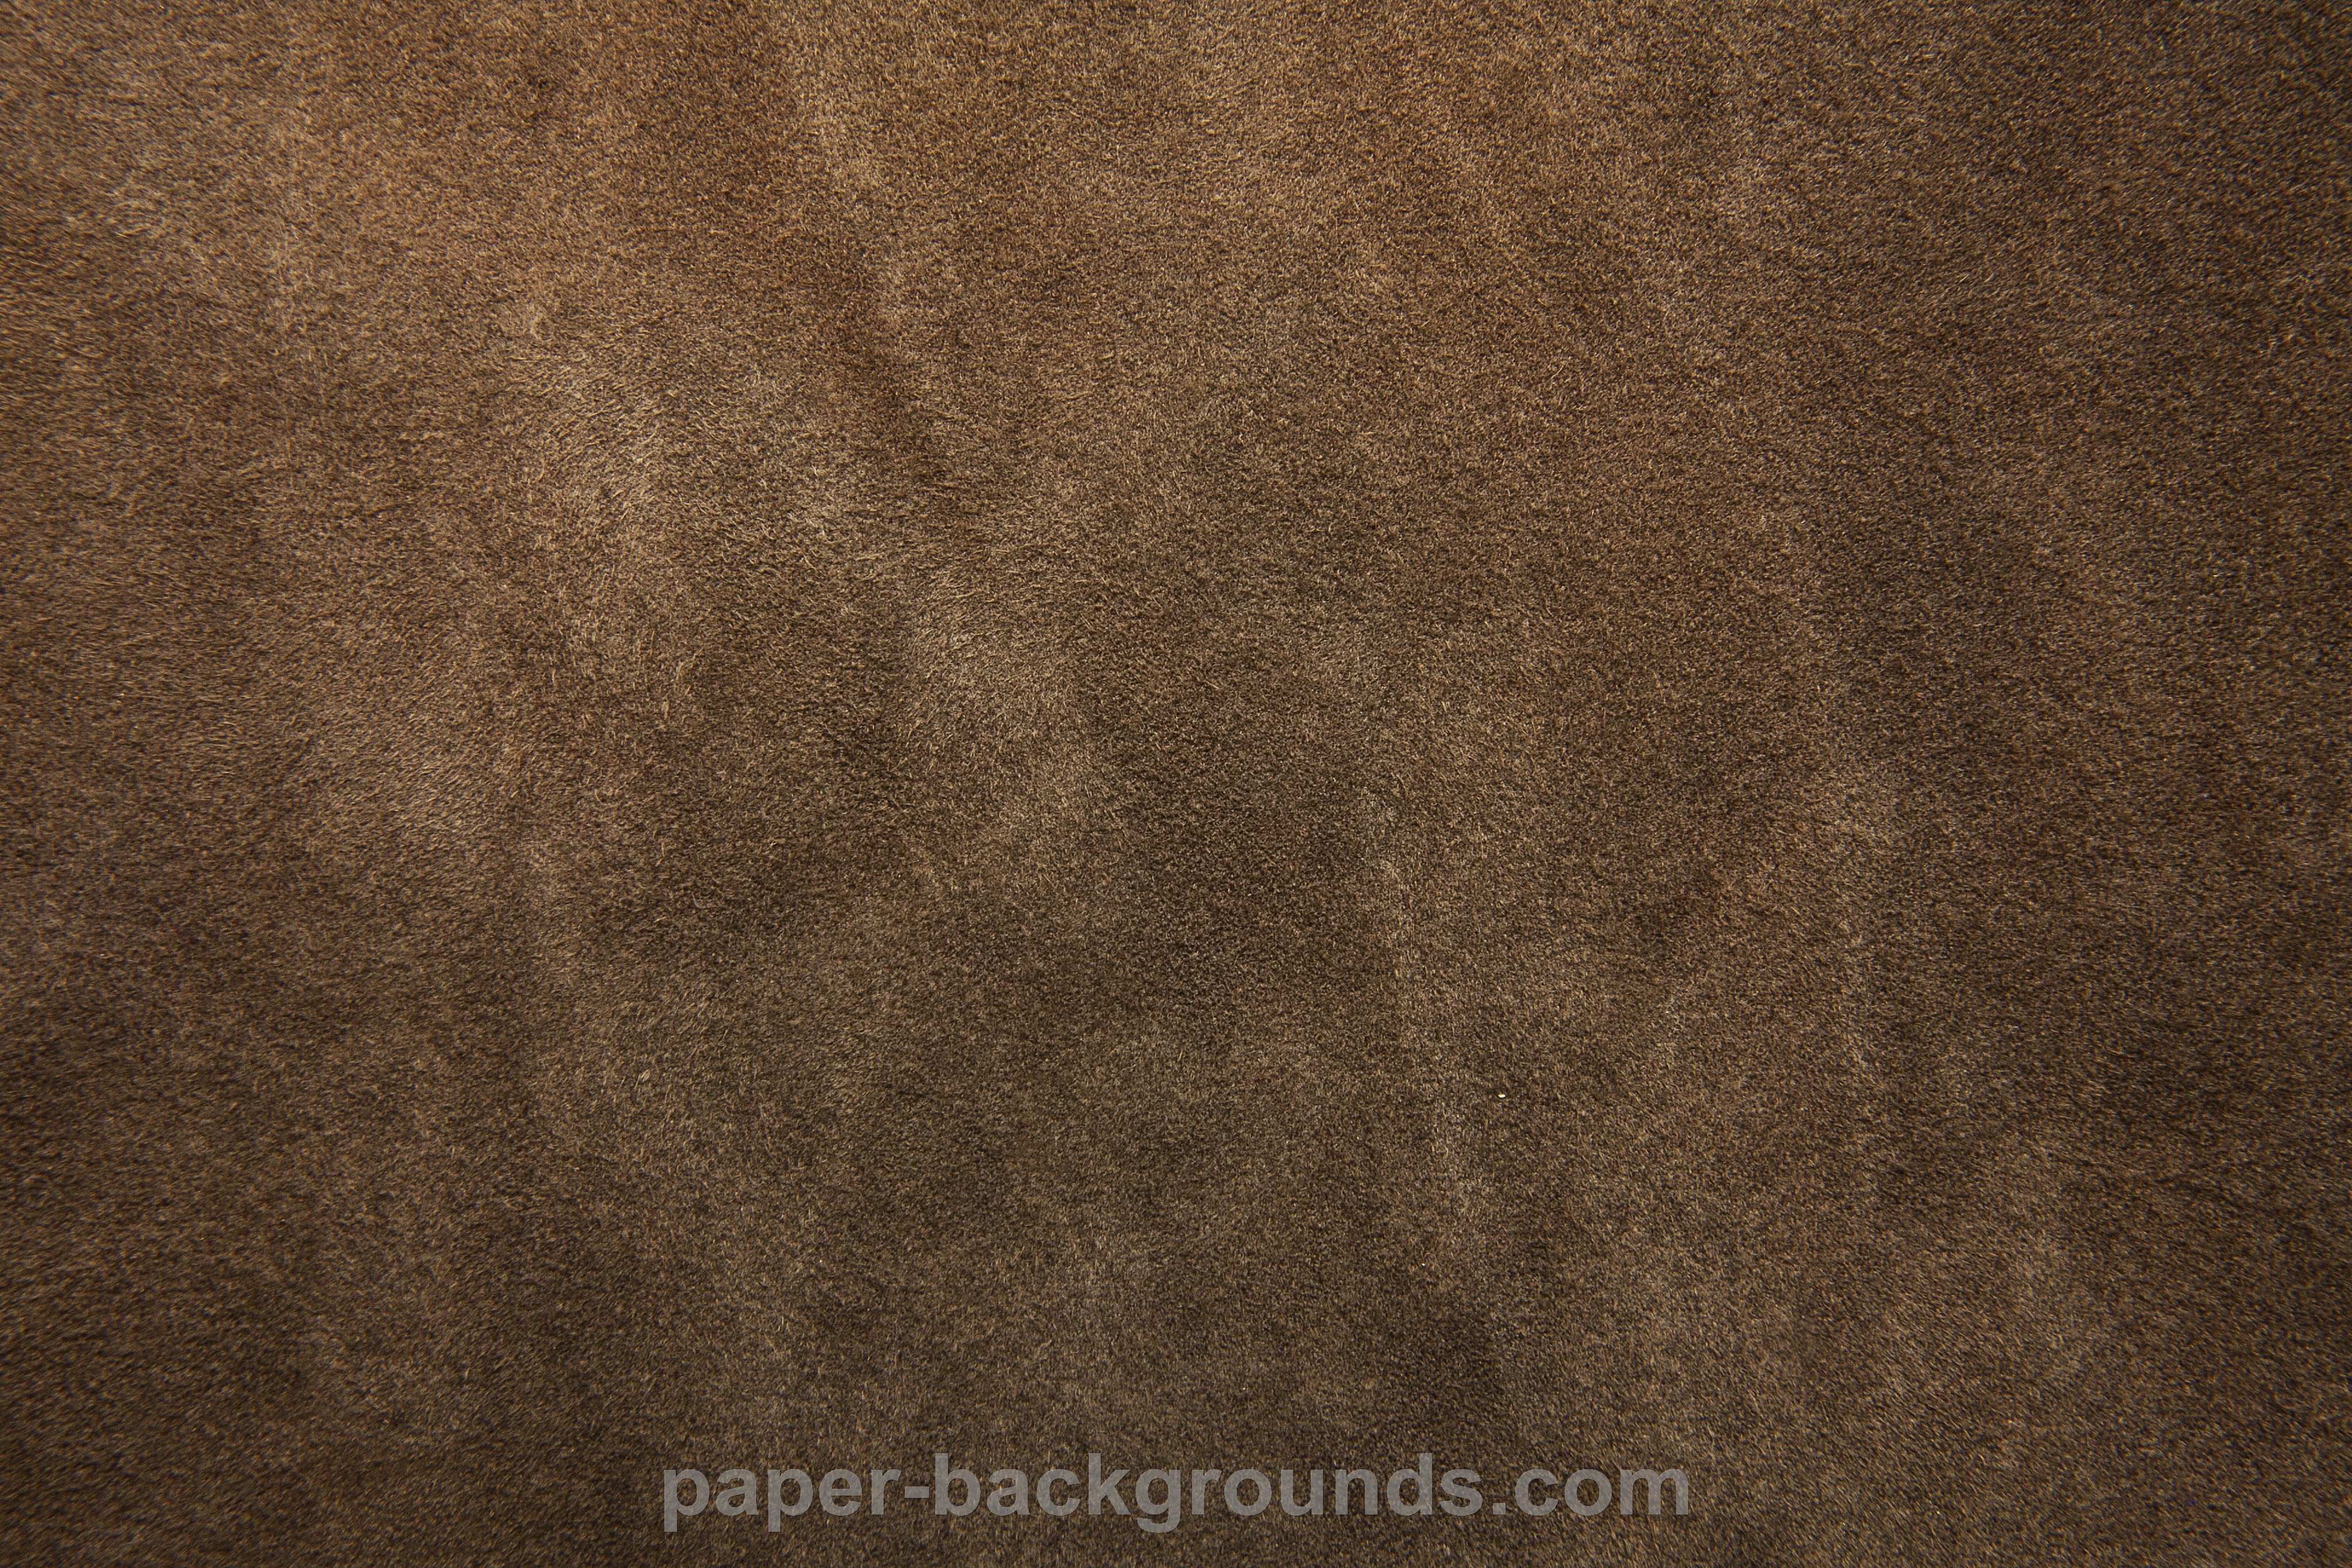  Leather Wallpaper Brown leather texture background paper backgrounds